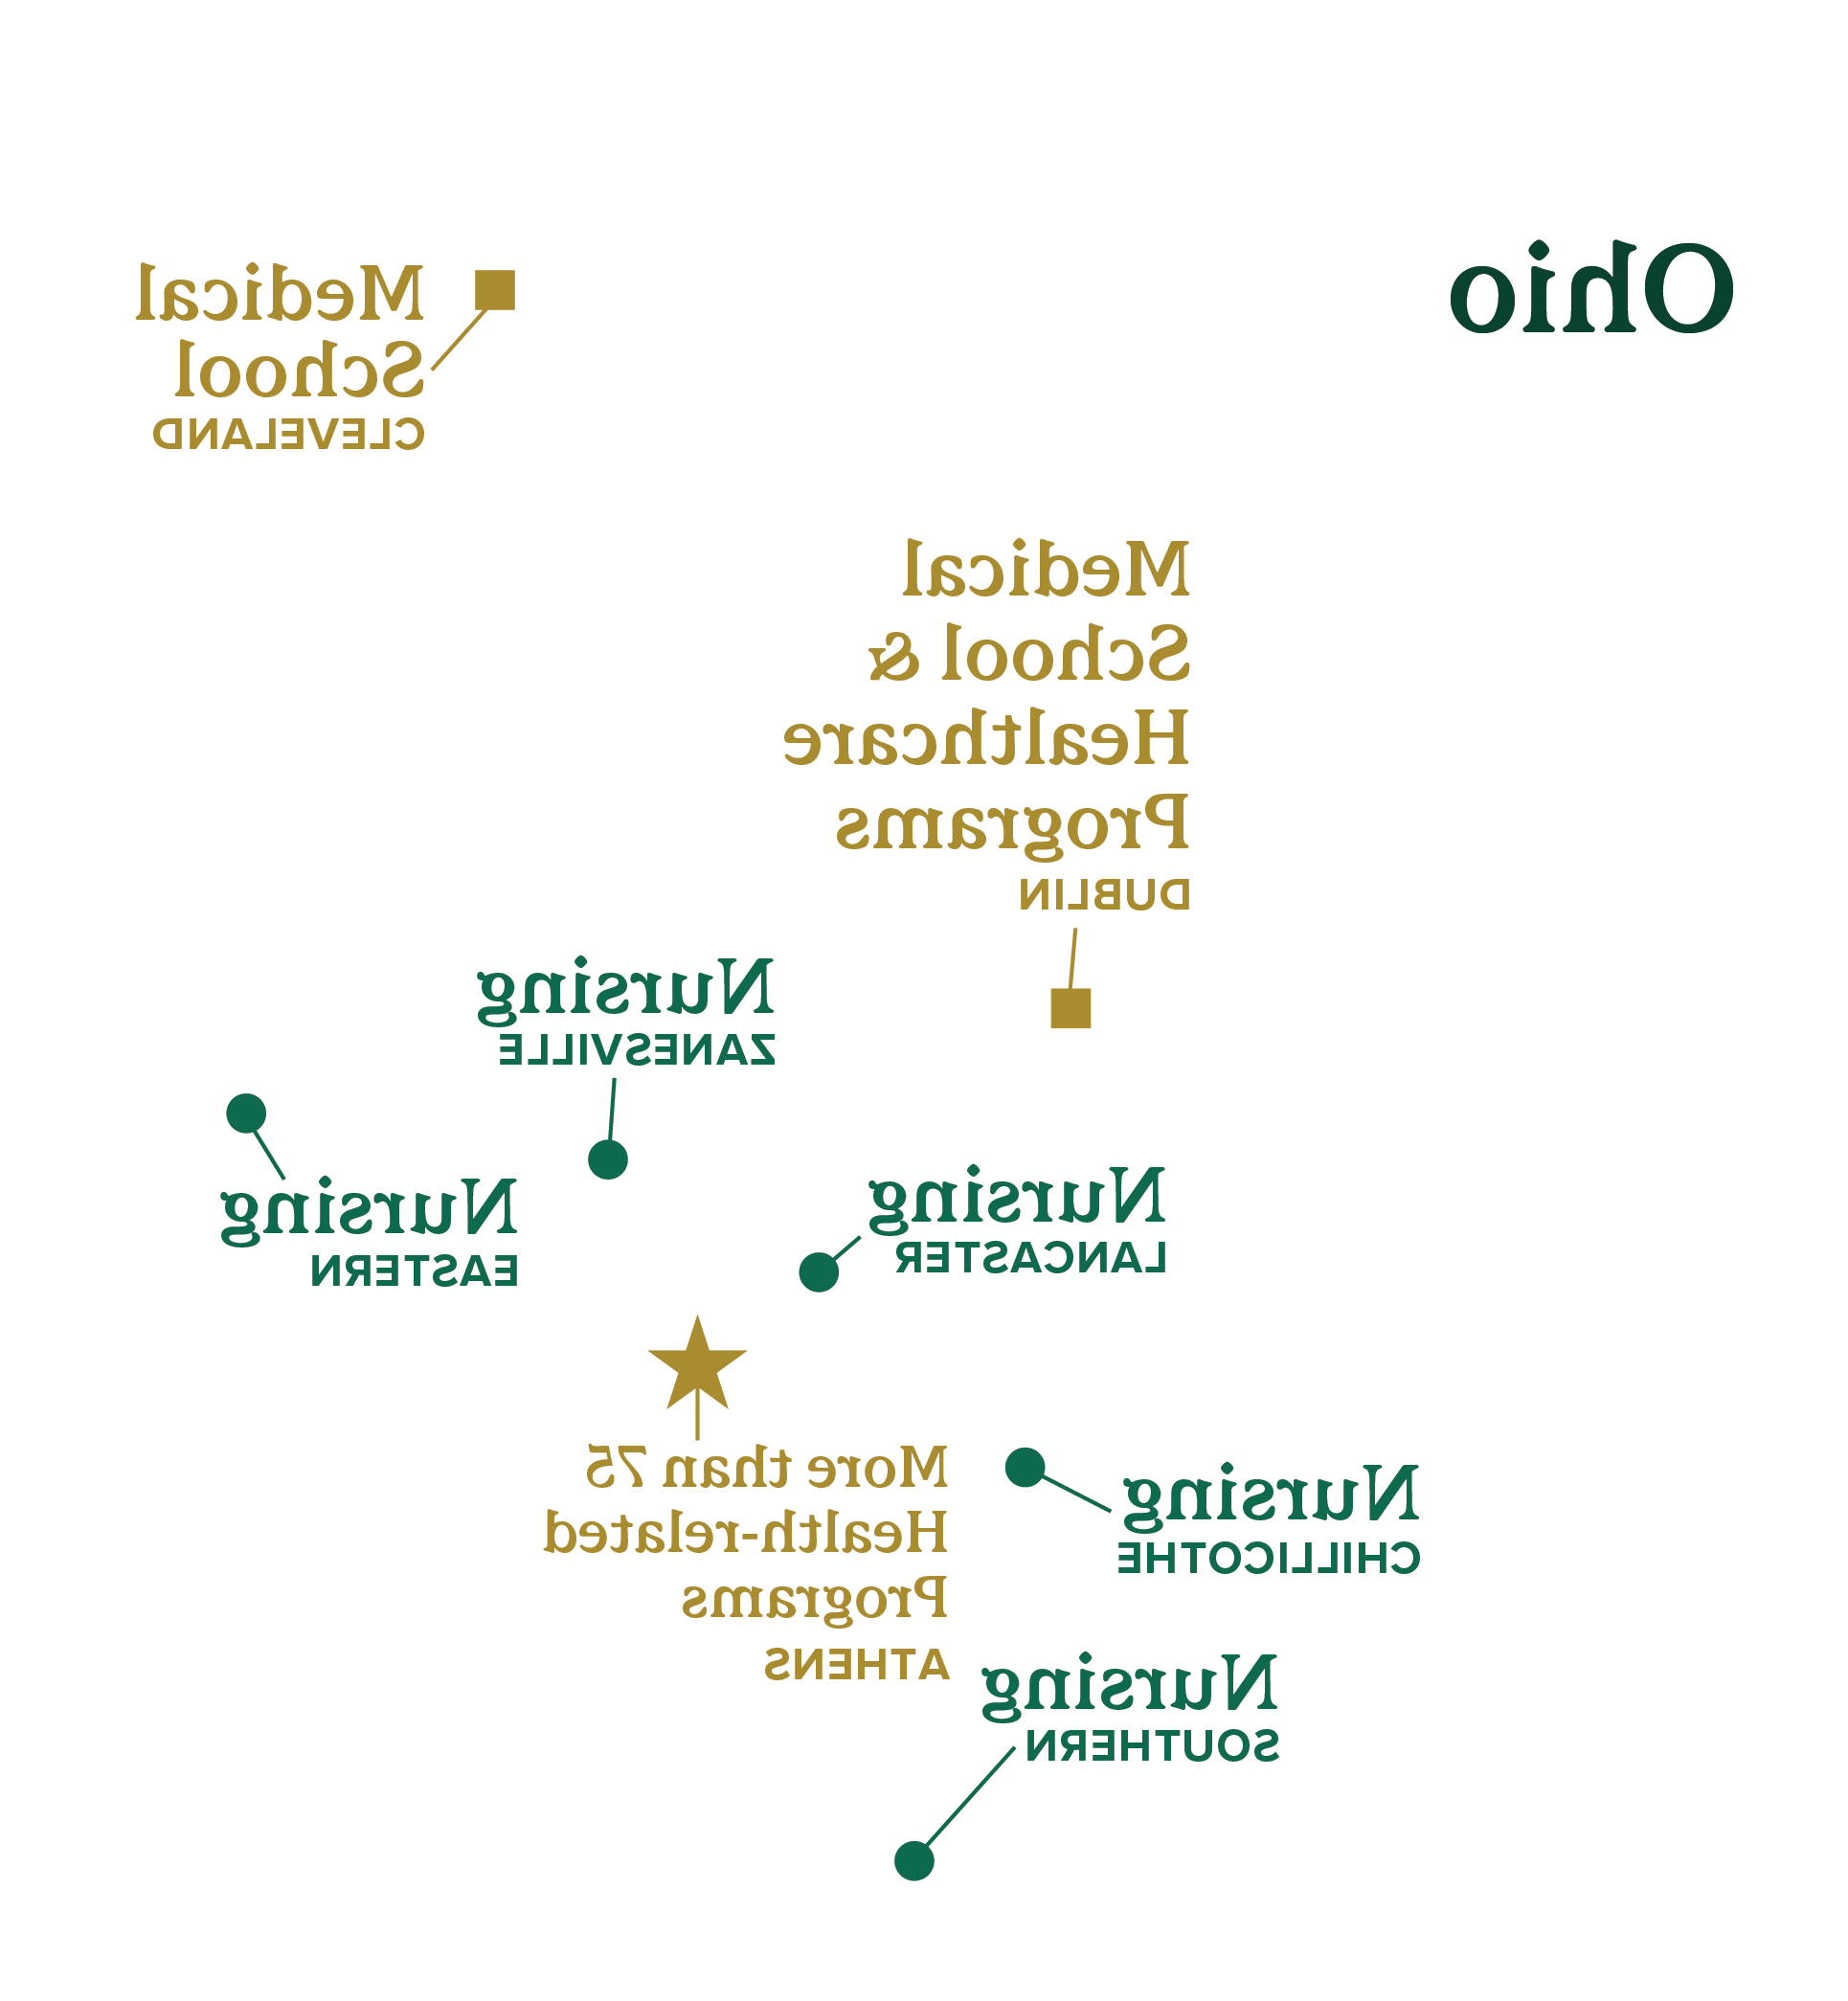 Map of the state of Ohio with Nursing marked in Lancaster, Chillicothe, Southern, Eastern and Zanesville. Medical school is noted at Cleveland. Medical school and healthcare programs at Dublin. "More than 75 health-related programs" marked at Athens.